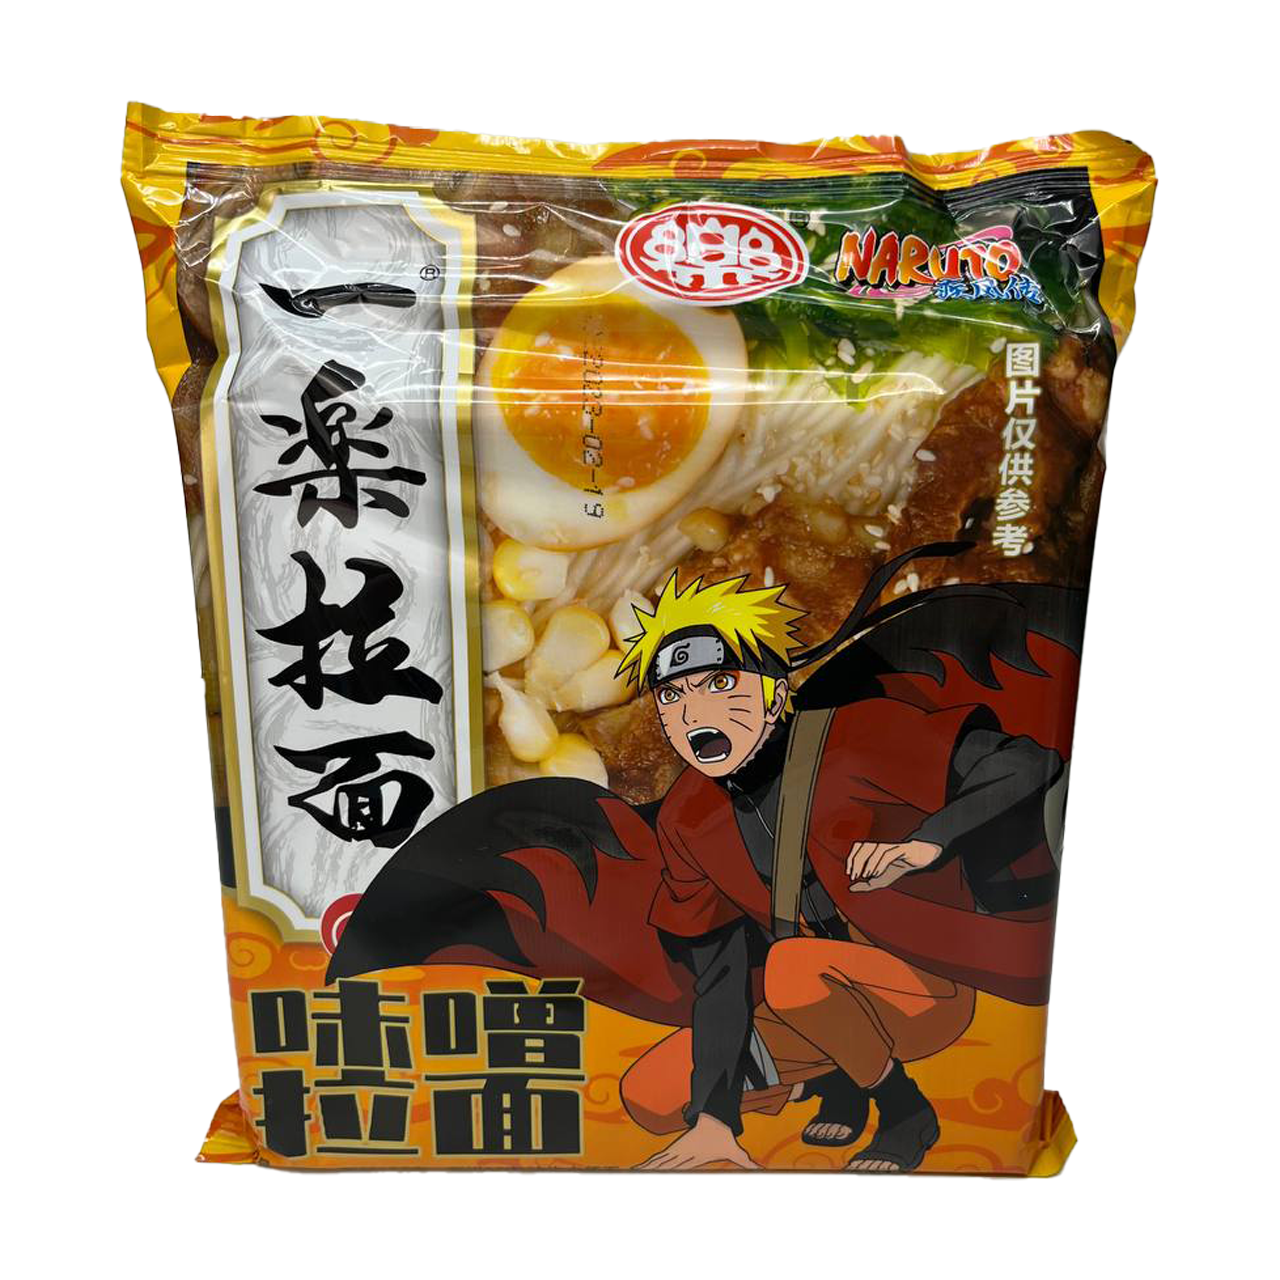 Yile Noodles - Naruto Instant Noodles 135g